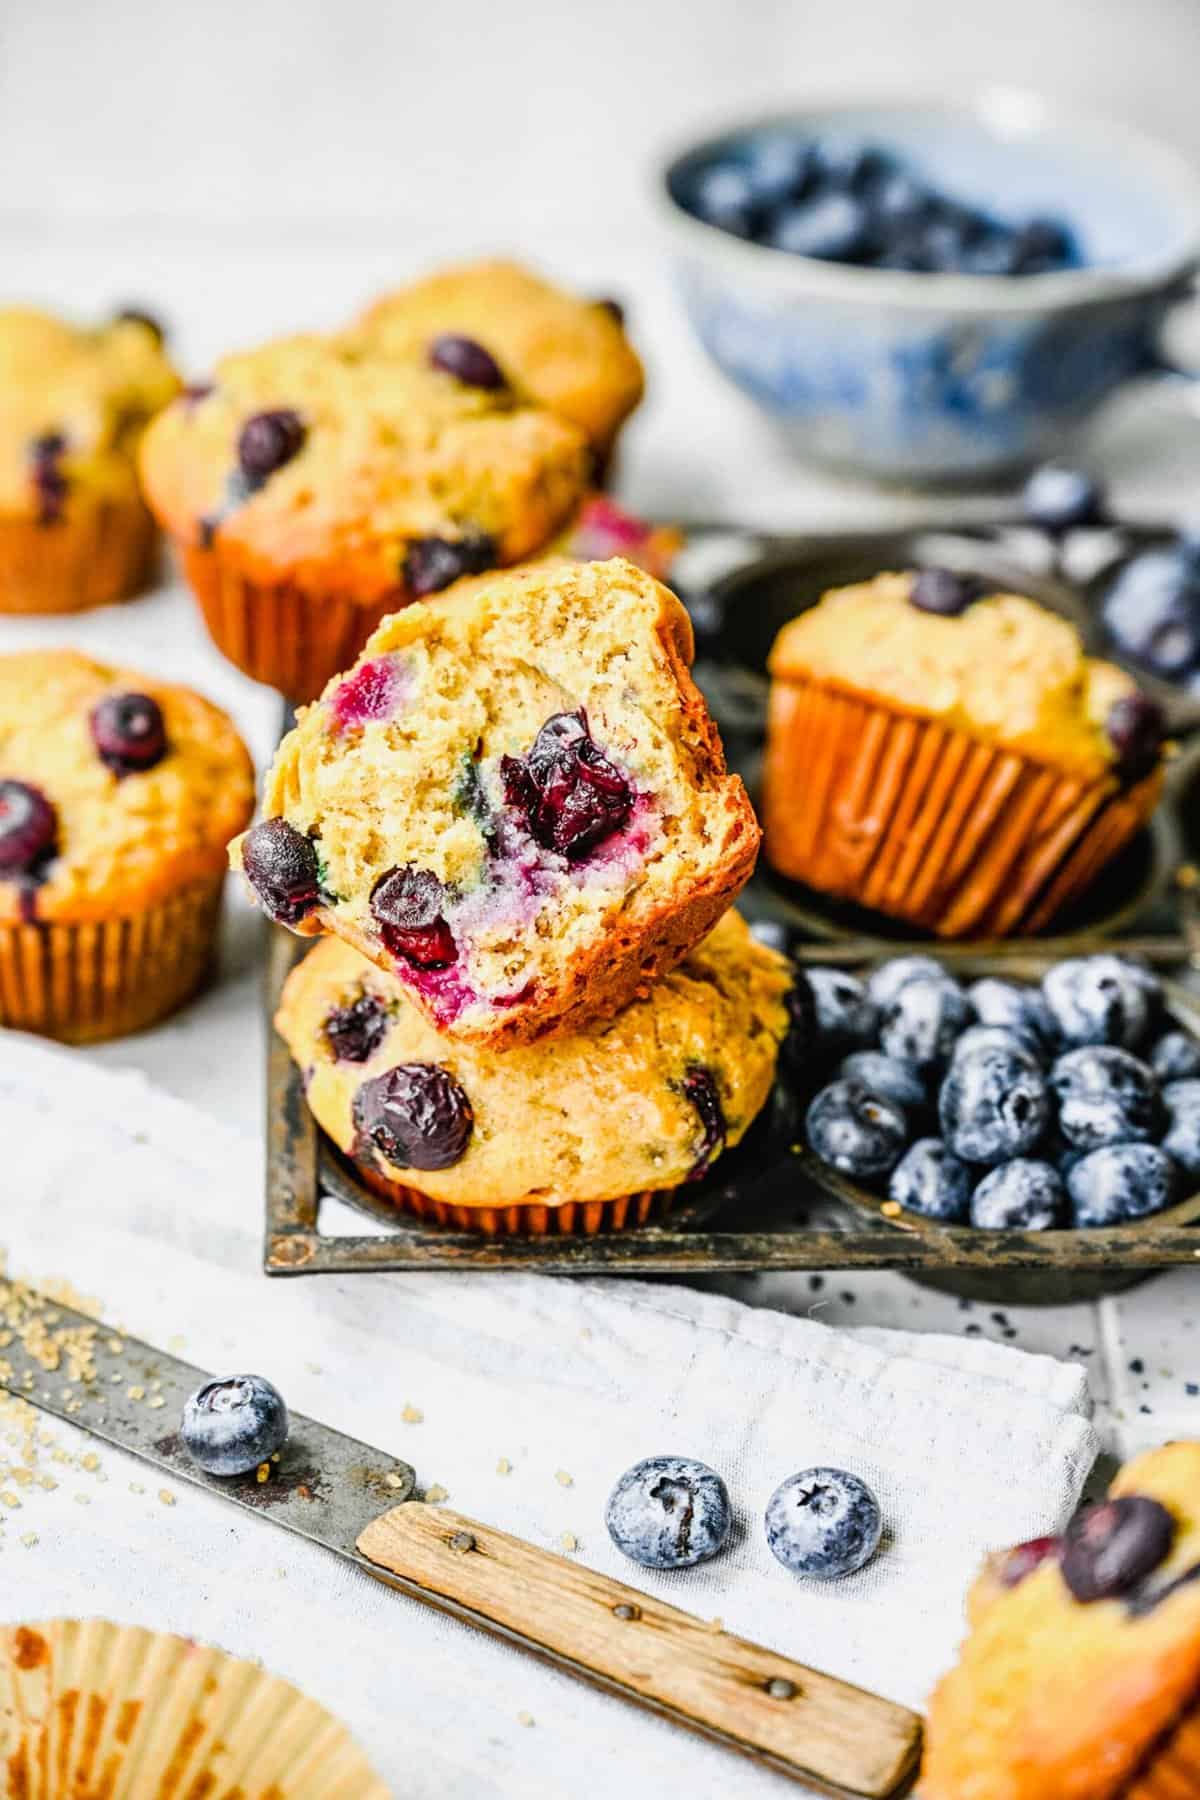 A banana blueberry muffins sliced in half next to whole muffins, a knife, and fresh blueberries.